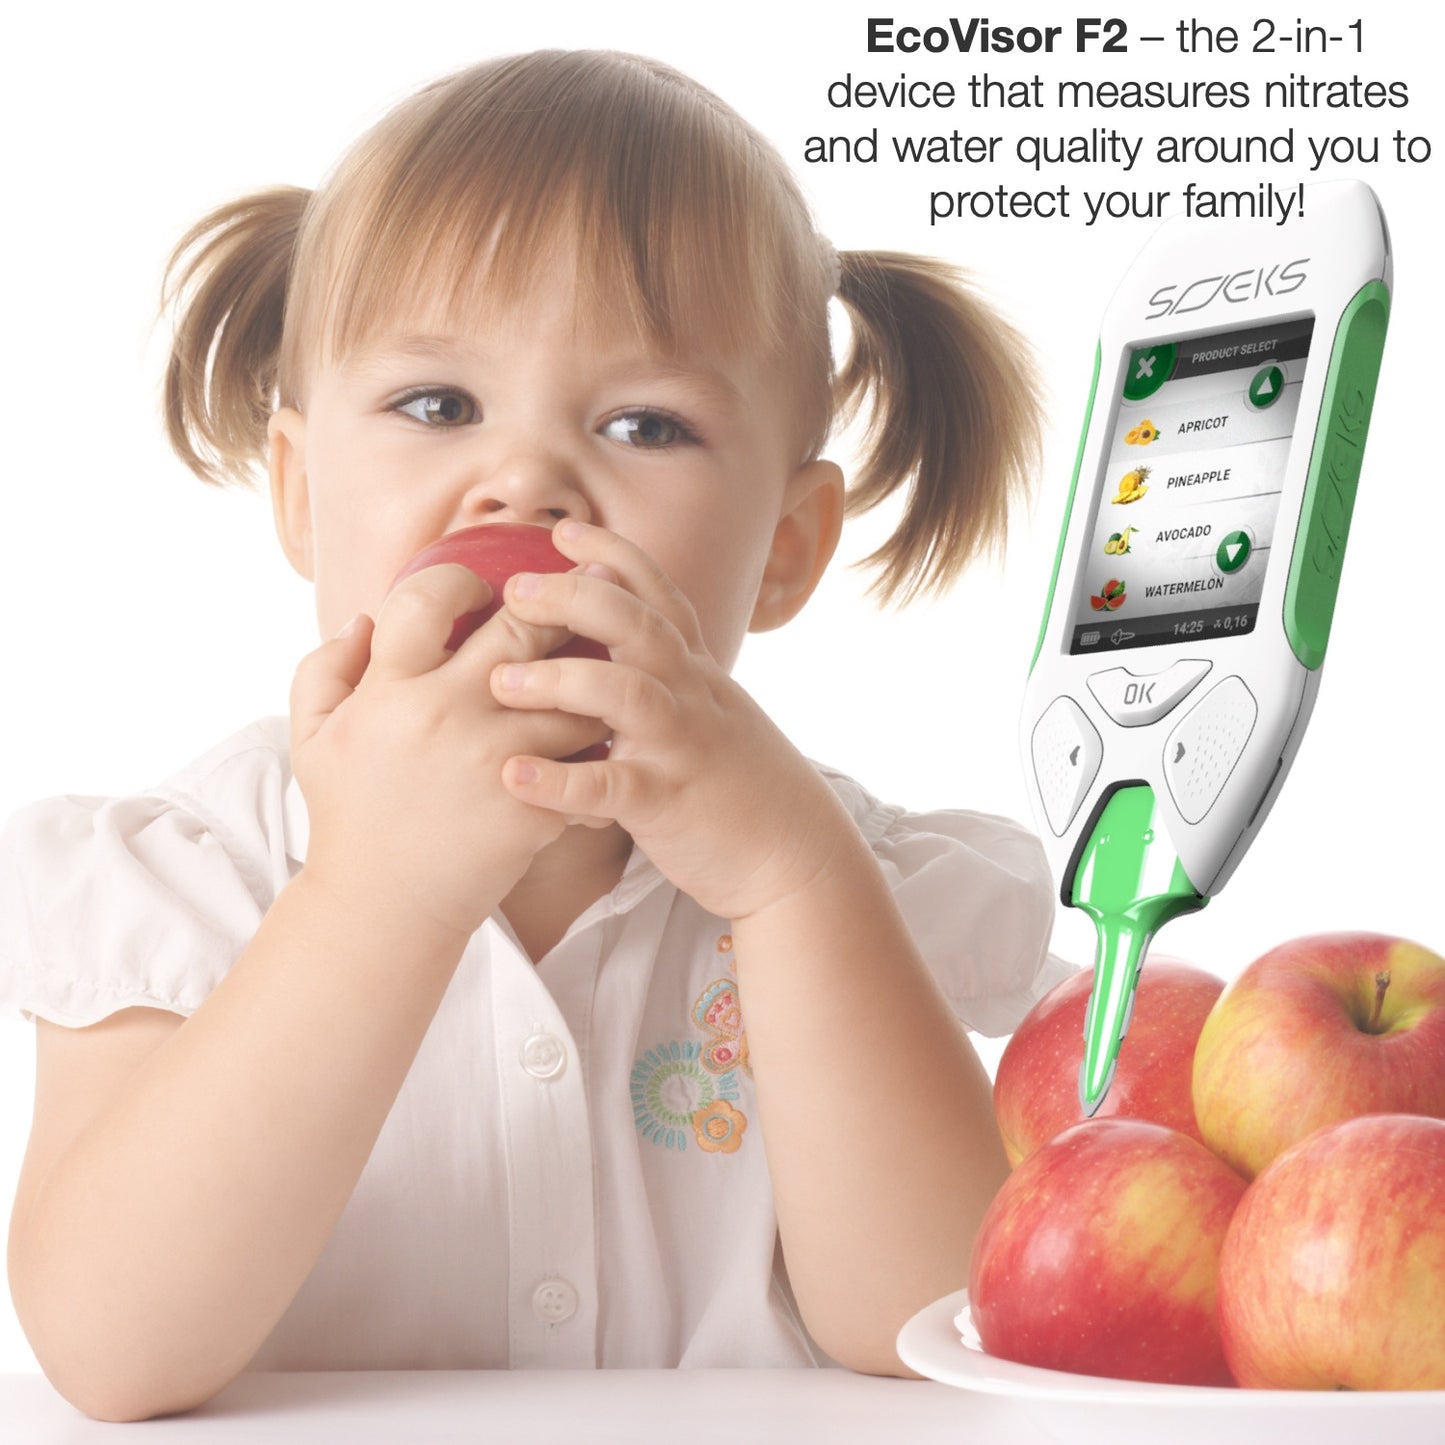 EcoVisor F2 the 2-in-1 device that measures nitrates and water quality around you to protect your family!